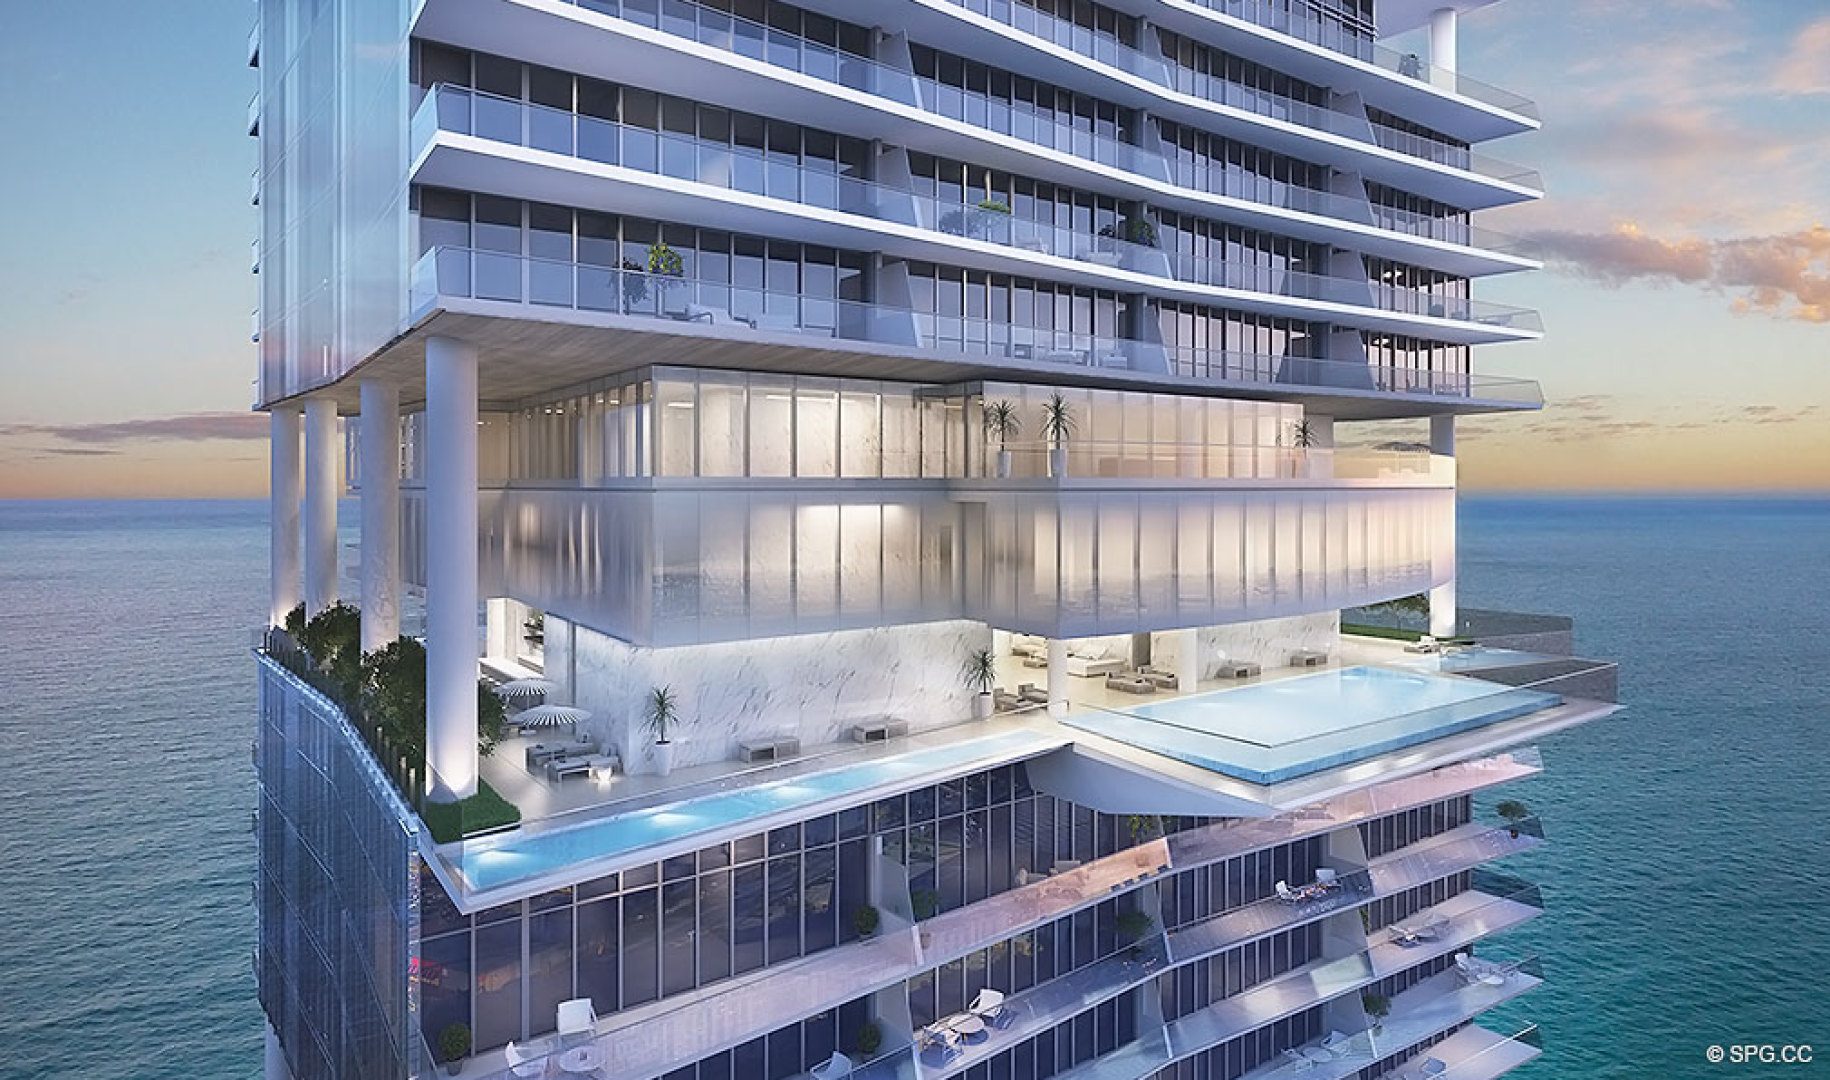 Terrace Pool at Turnberry Ocean Club, Luxury Oceanfront Condos Located at 18501 Collins Avenue, Sunny Isles Beach, Miami 33160